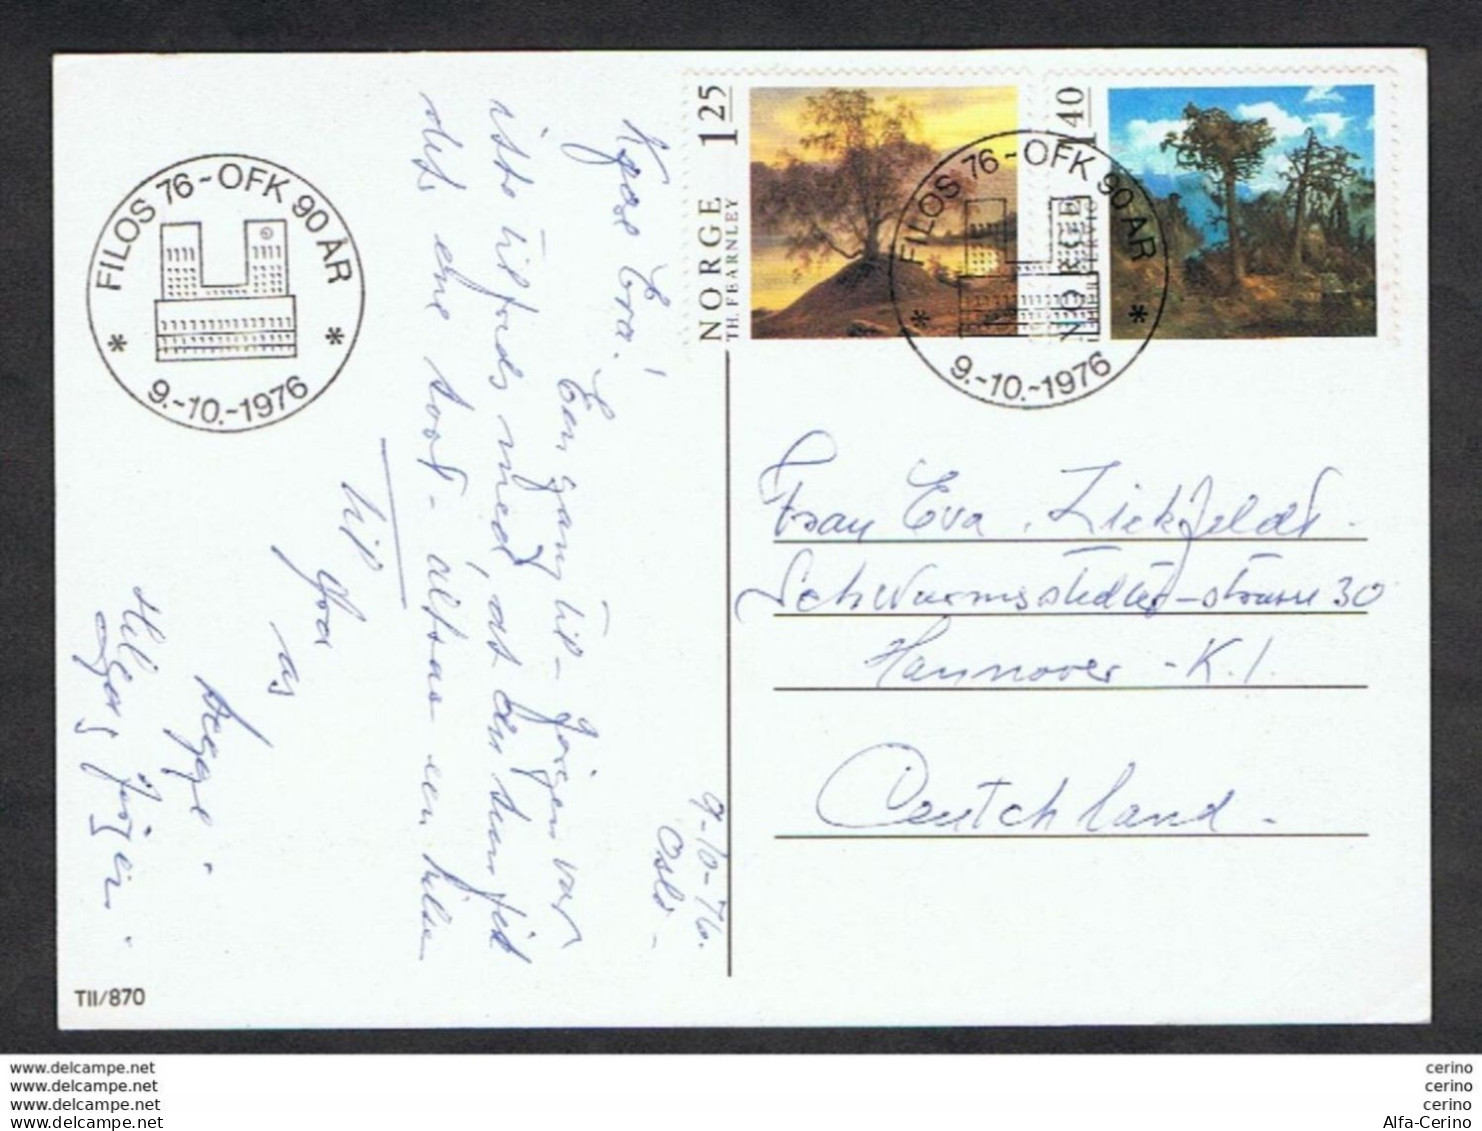 NORWAY: 9-10-1976 ILLUSTRATED POSTCARD "FILOS 76" WITH: 125 Ore + 140 Ore (688 + 689) - TO GERMANY - Covers & Documents